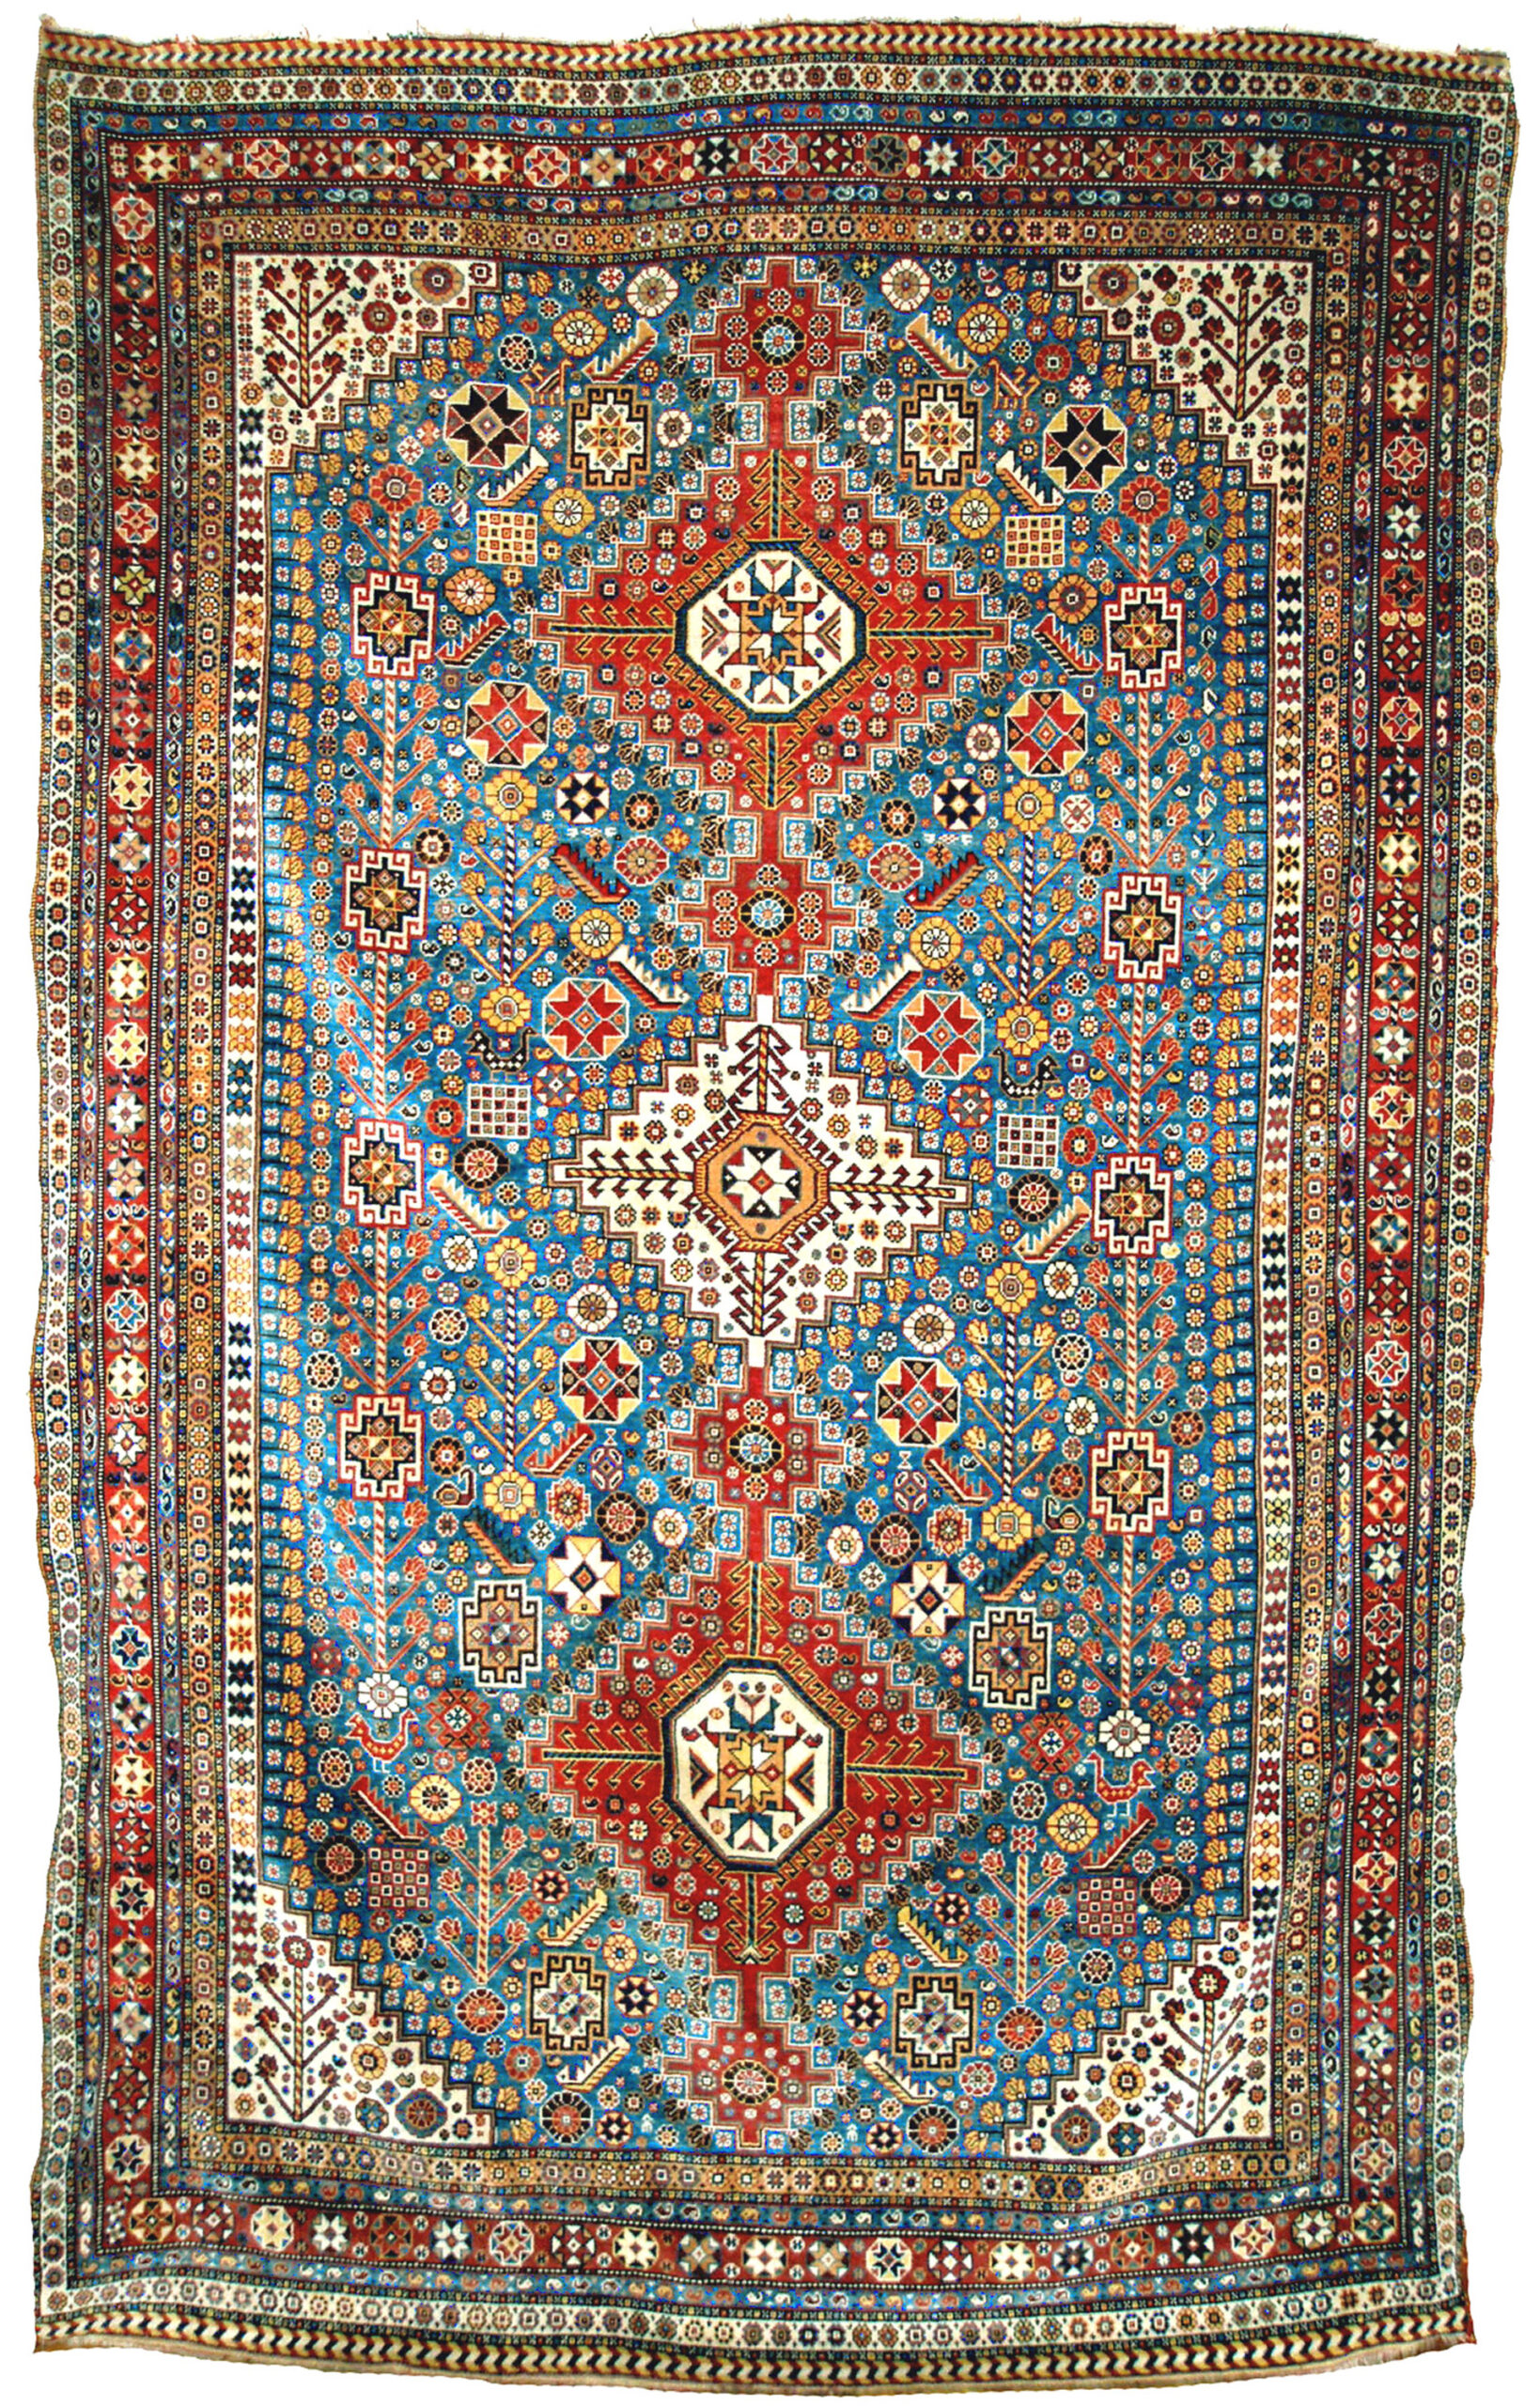 Antique southwest Persian QashQa'i tribal carpet, Douglas Stock Gallery, antique rug research archives